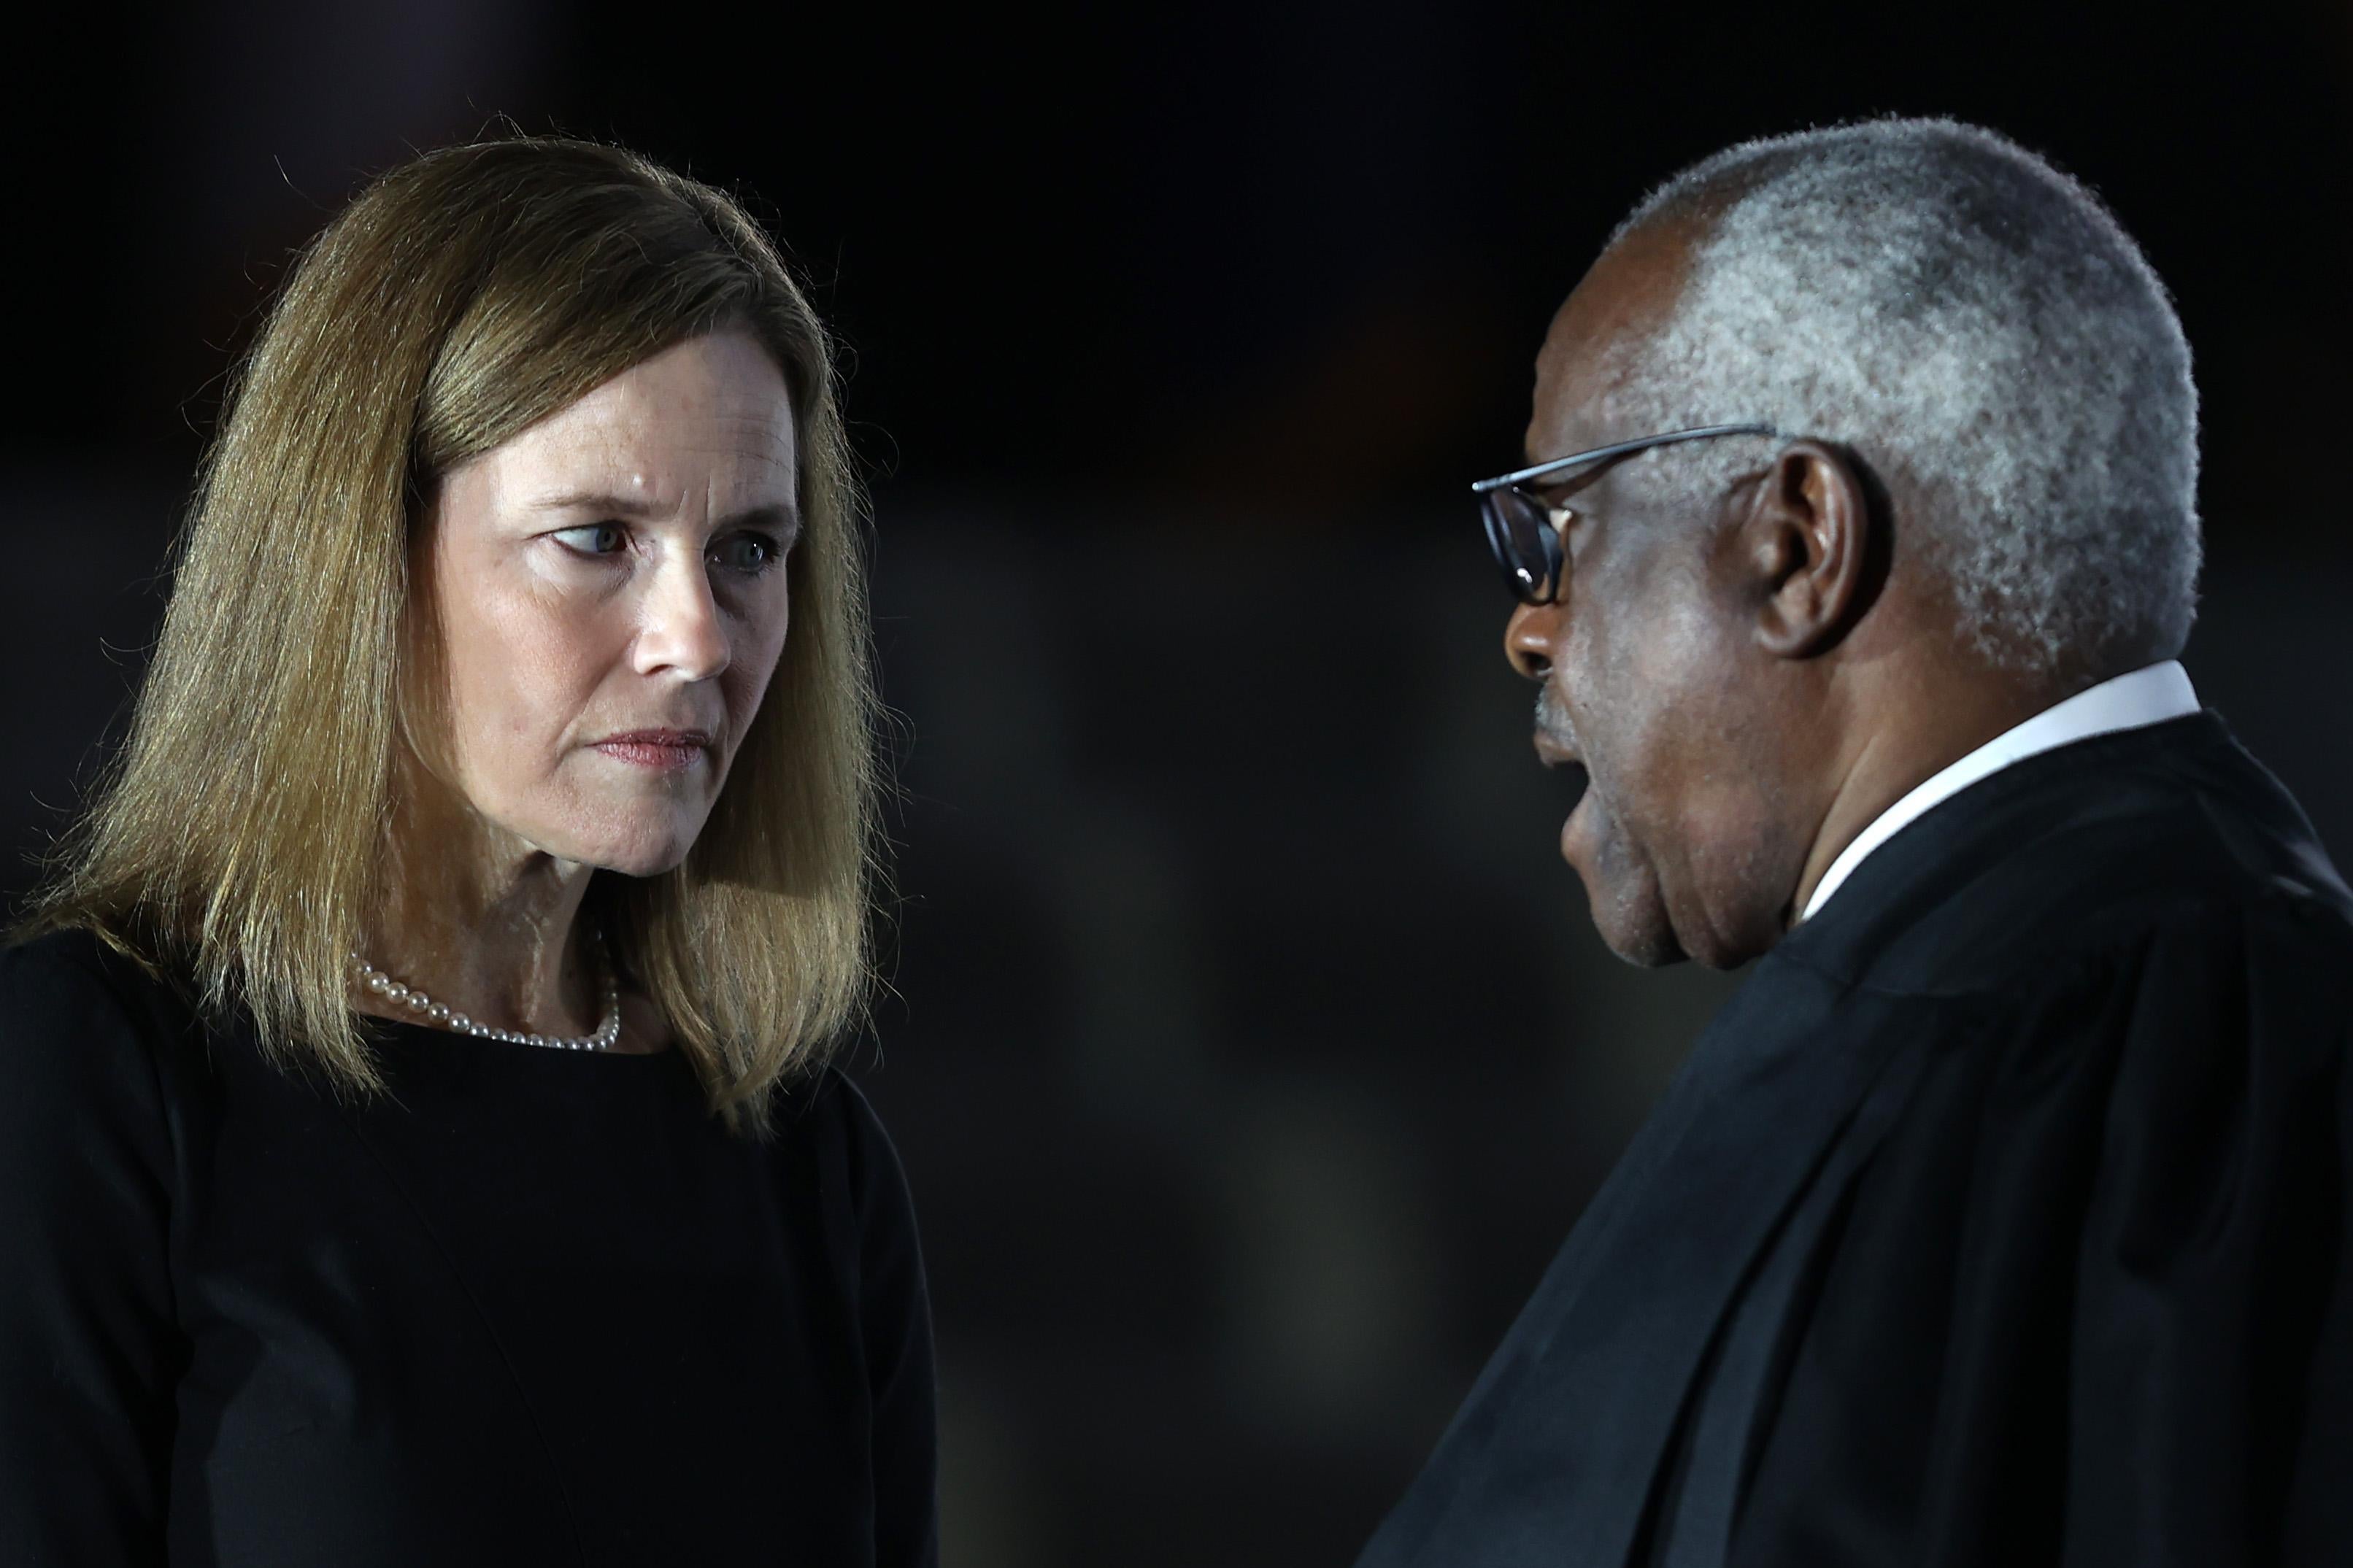 Judge Amy Coney Barrett talks with Supreme Court Associate Justice Clarence Thomas during her ceremonial swearing-in ceremony to be U.S. Supreme Court Associate Justice, on the South Lawn of the White House October 26, 2020 in Washington, 